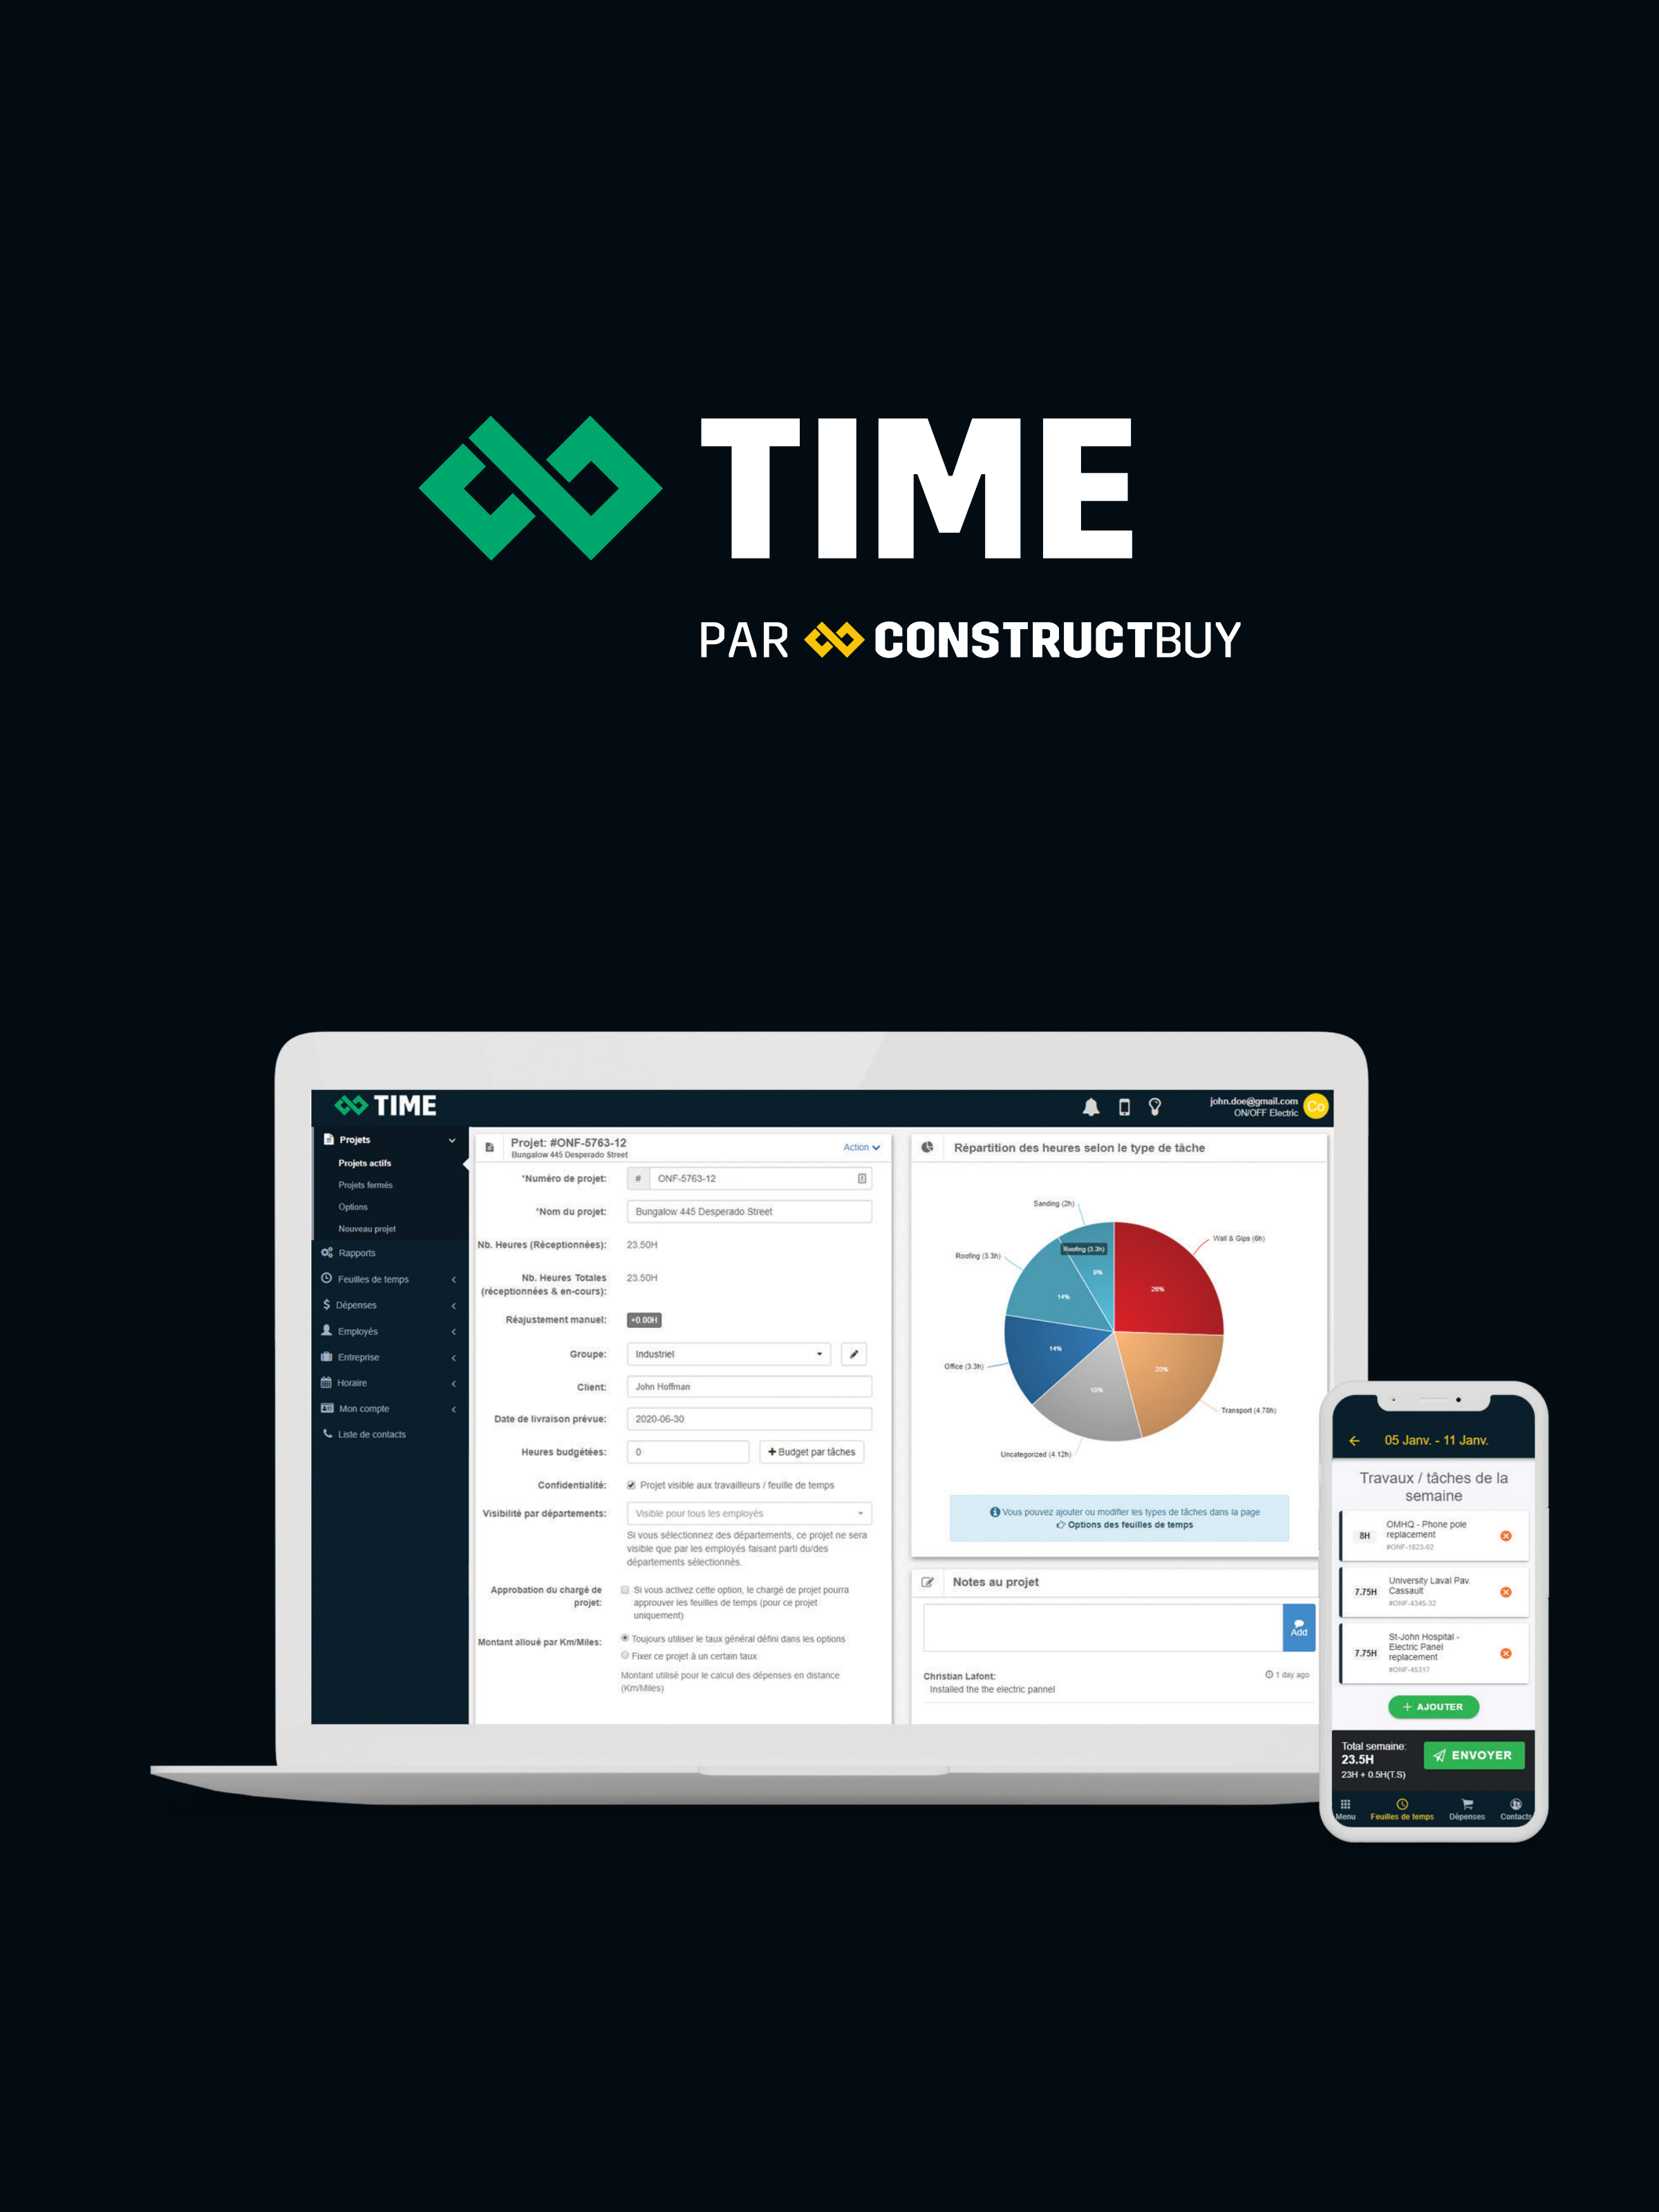 Digital tool to compile your staff timesheets and employee expenses. Let TIME compile expenses, calculate your employees’ time cards and organize the information for you. Create schedules and share them with employees on their mobile devices.